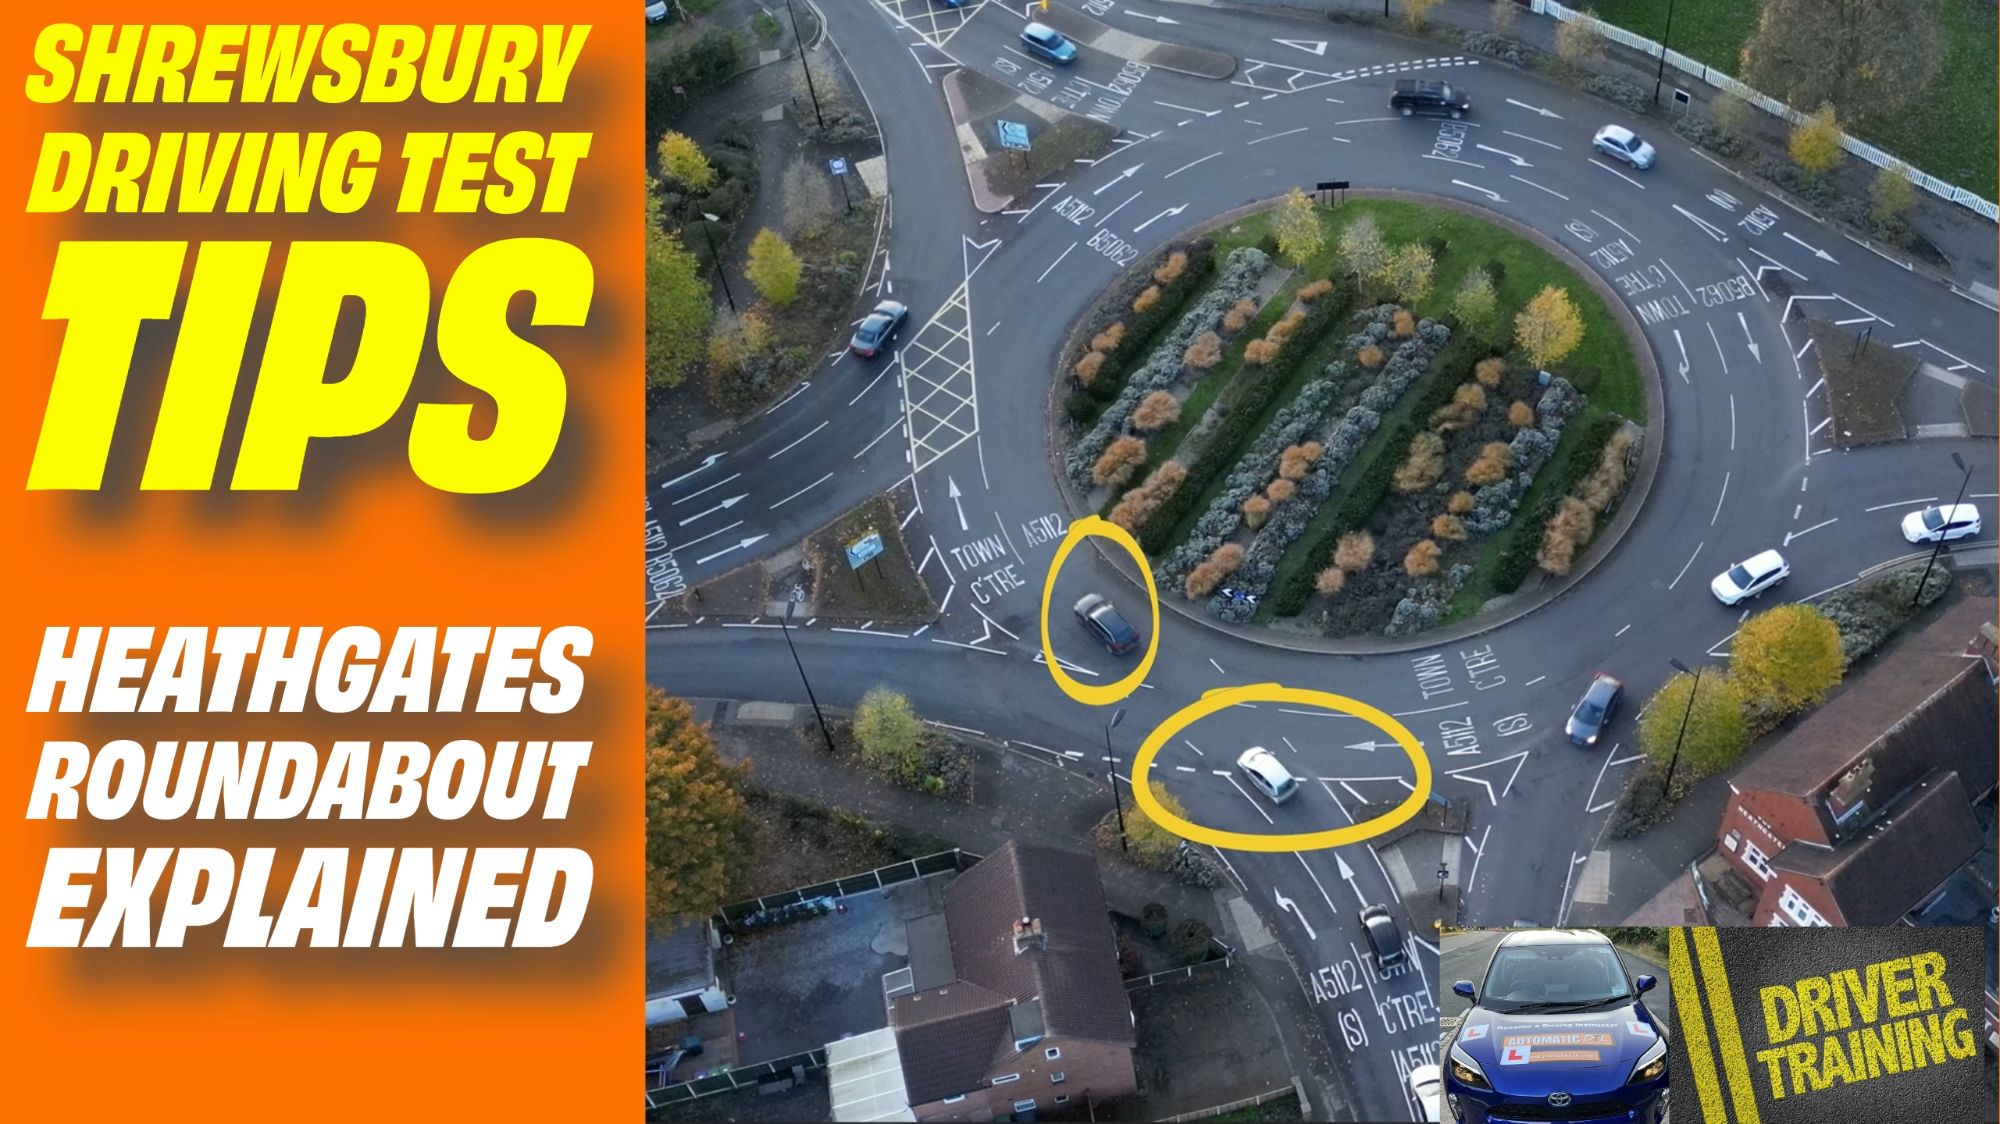 Understanding the Roundabout:  The Heathgates Roundabout is a multi-lane traffic circle designed to facilitate the smooth flow of vehicles from various directions. To successfully navigate it, drivers must be aware of the key exits and understand the road markings. The roundabout serves as a crucial hub connecting several major routes, including the A5124 leading towards Shrewsbury town center and the A5191 heading towards the A5.  Tips for Navigating Heathgates Roundabout:  Approach with Caution:  As you approach the roundabout, reduce your speed and be prepared to yield to traffic already on the roundabout. Keep an eye on road signs indicating the correct lanes for your desired exit.  Choose the Right Lane:  The Heathgates Roundabout has multiple lanes, each leading to different exits. Pay attention to road markings and signs to choose the correct lane for your destination in advance.